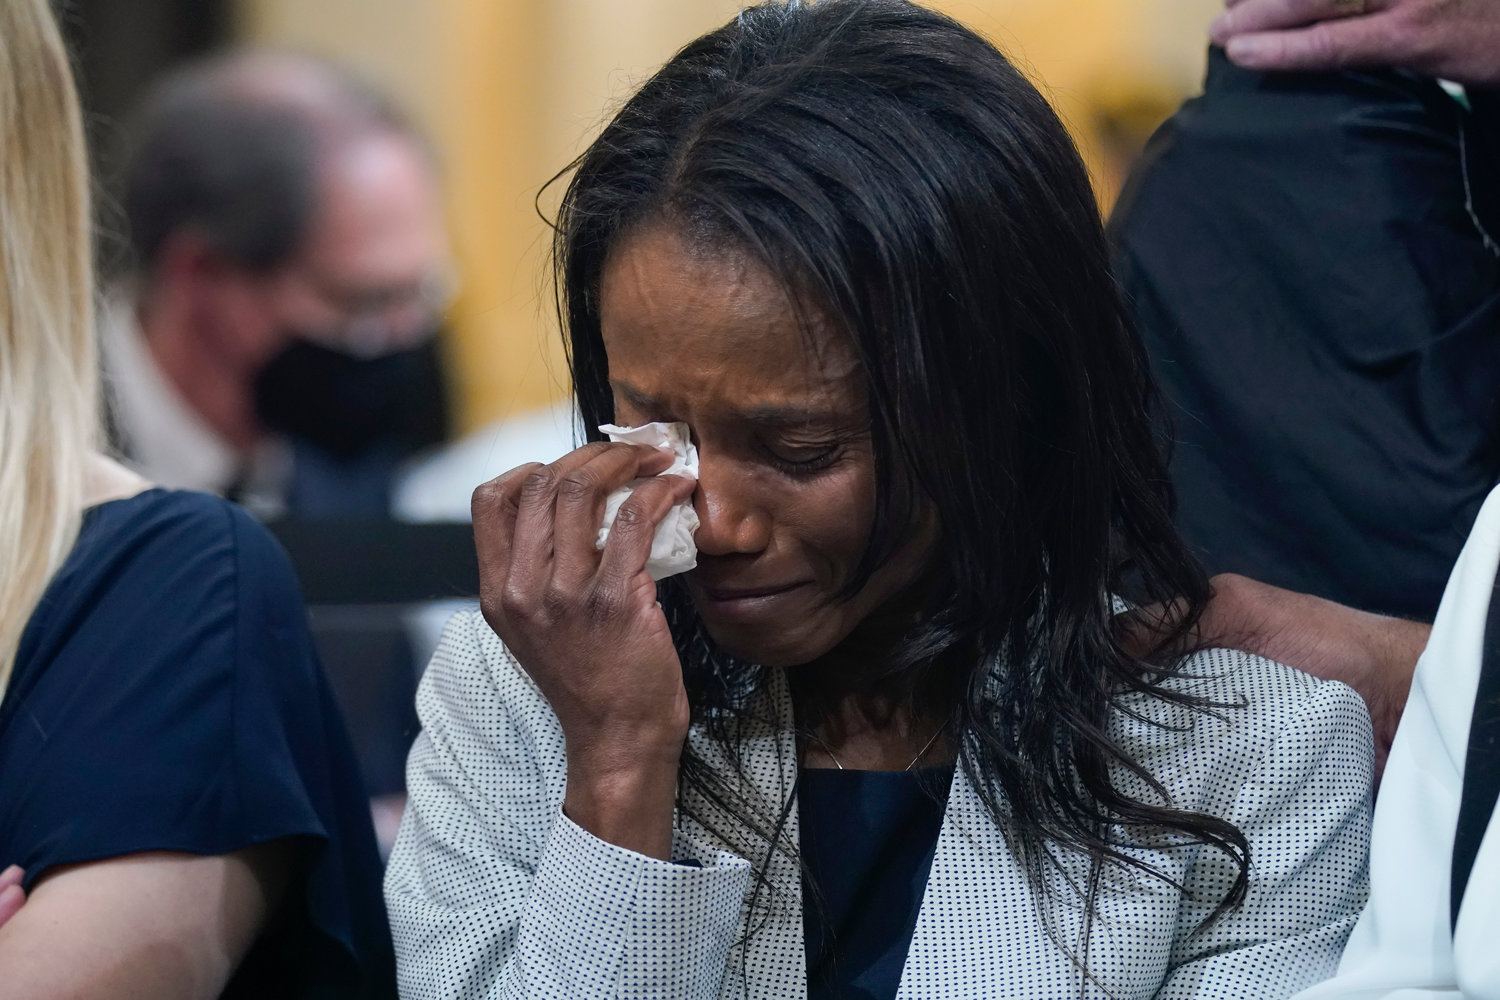 Serena Liebengood, widow of Capitol Police officer Howie Liebengood, cries as a video of the Jan. 6 attack on the U.S. Capitol is played during a public hearing of the House select committee investigating the attack is held on Capitol Hill, Thursday, June 9, 2022, in Washington. (AP Photo/Andrew Harnik)